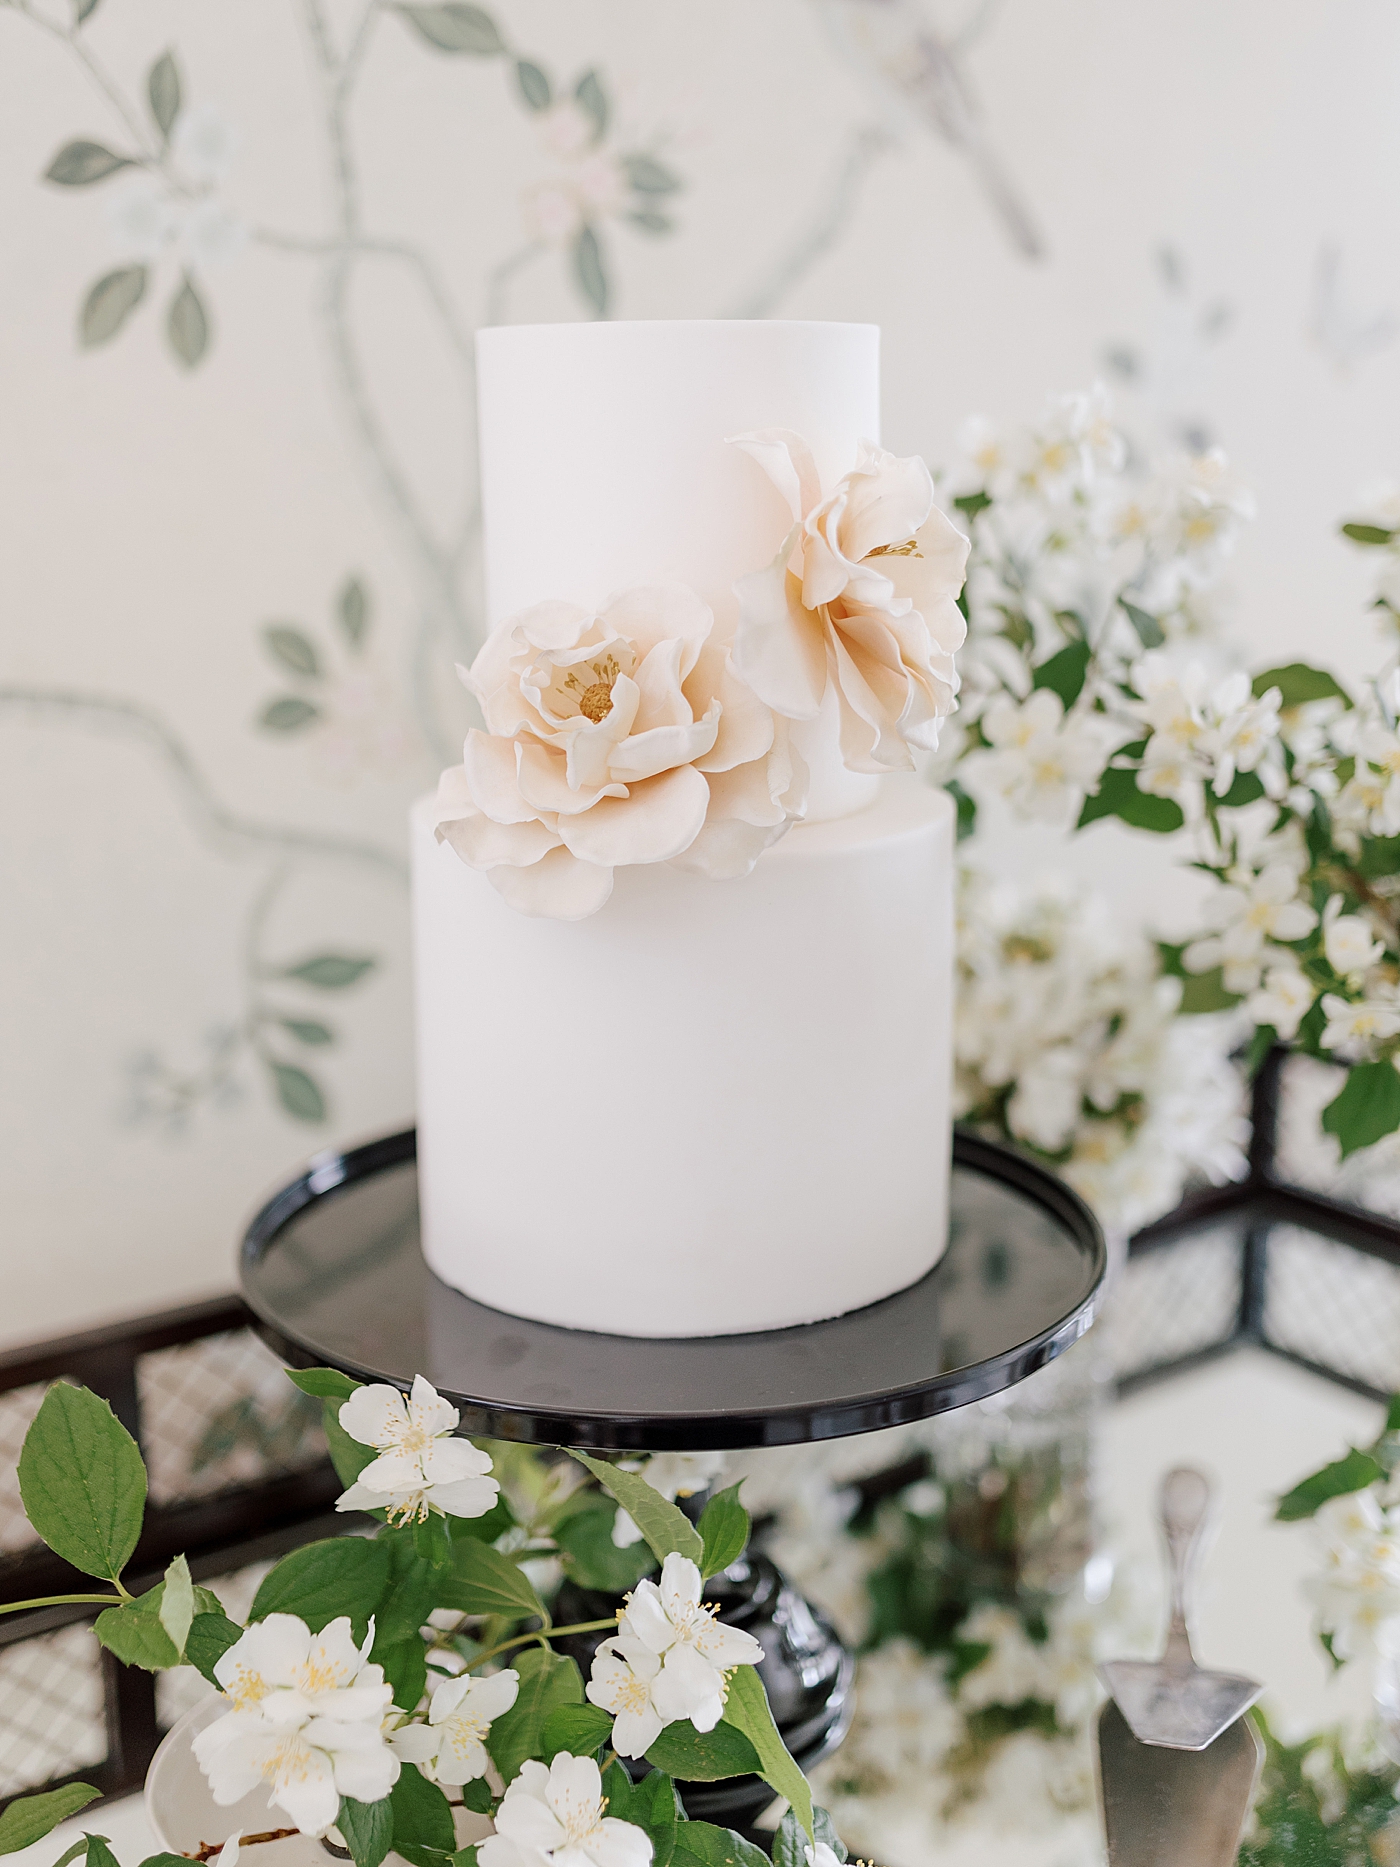 White wedding cake with pink sugar flowers in front of floral wallpaper | Photo by Hope Helmuth Photography